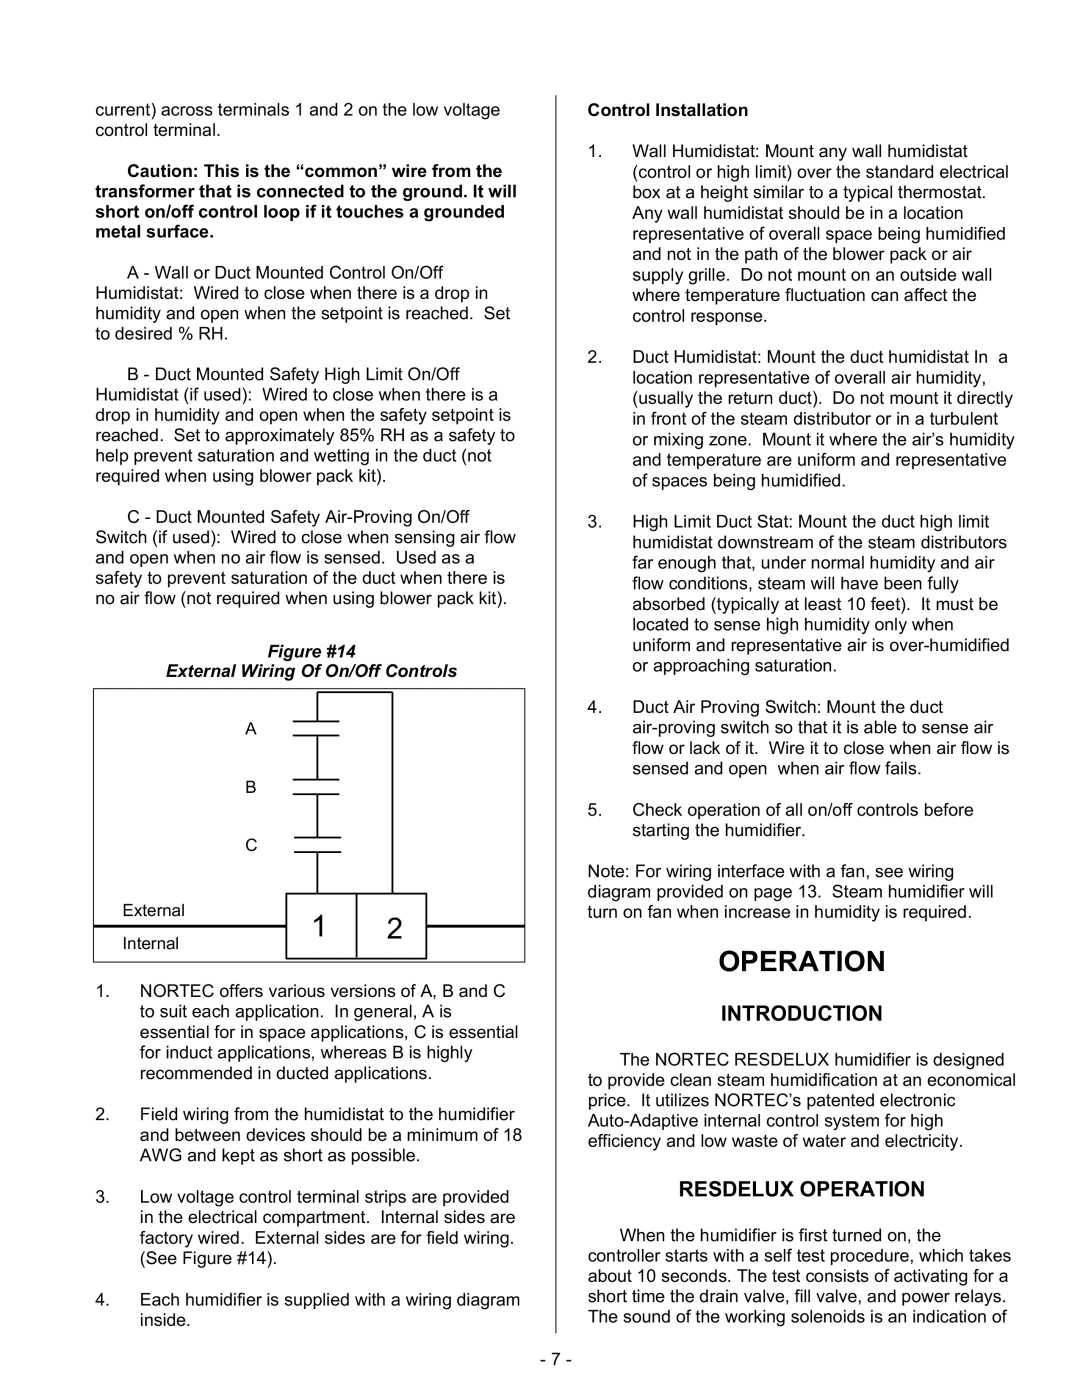 Nortec Steam Humidifiers manual Introduction, Resdelux Operation, Figure #14 External Wiring Of On/Off Controls 